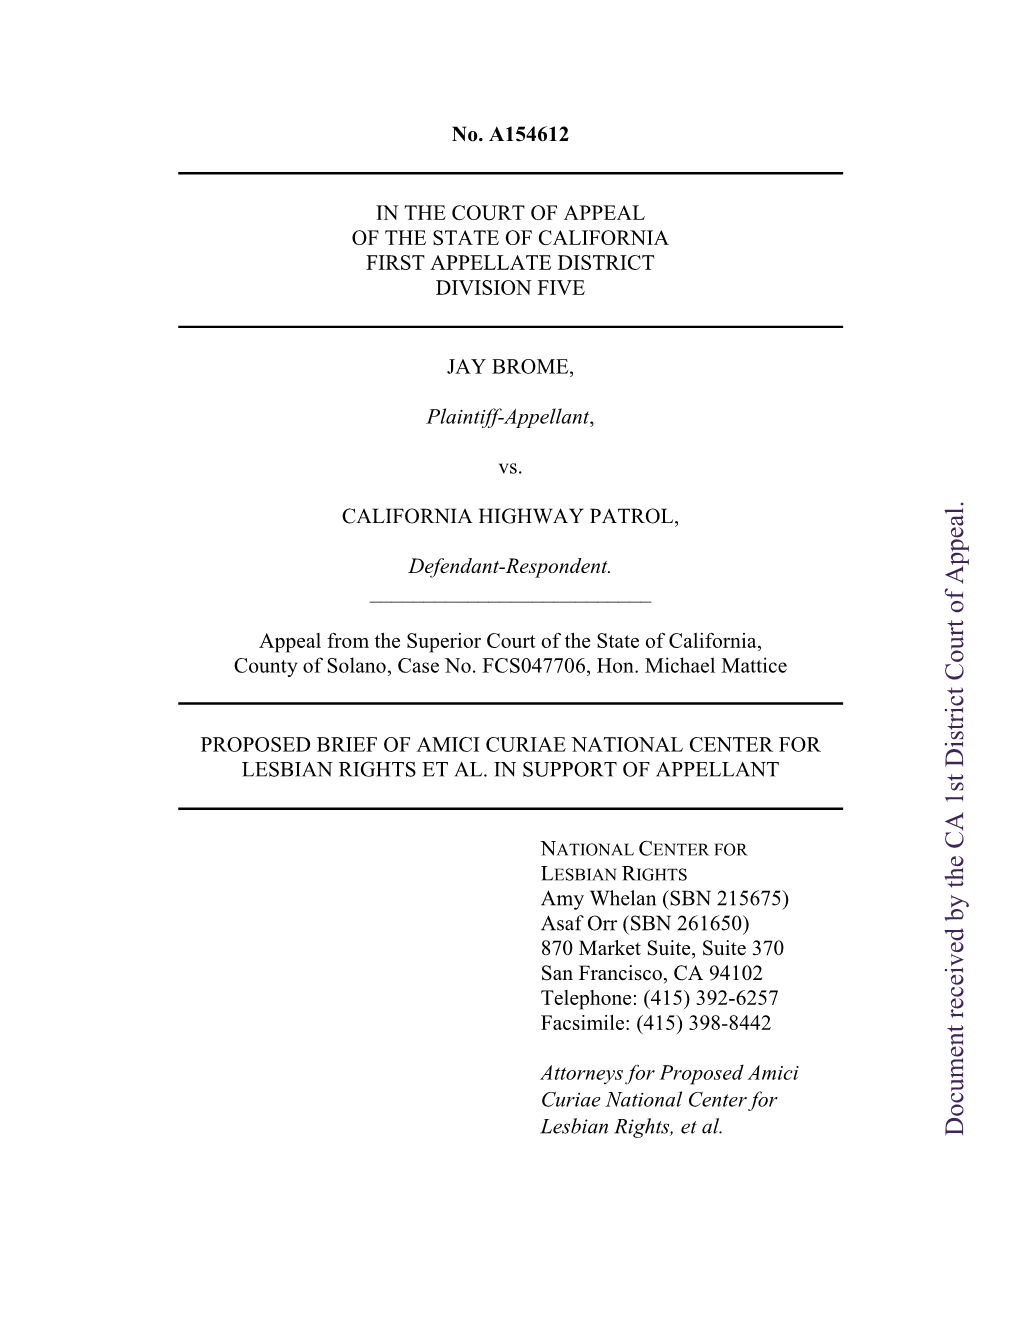 Document Received by the CA 1St District Court of Appeal. TABLE of CONTENTS